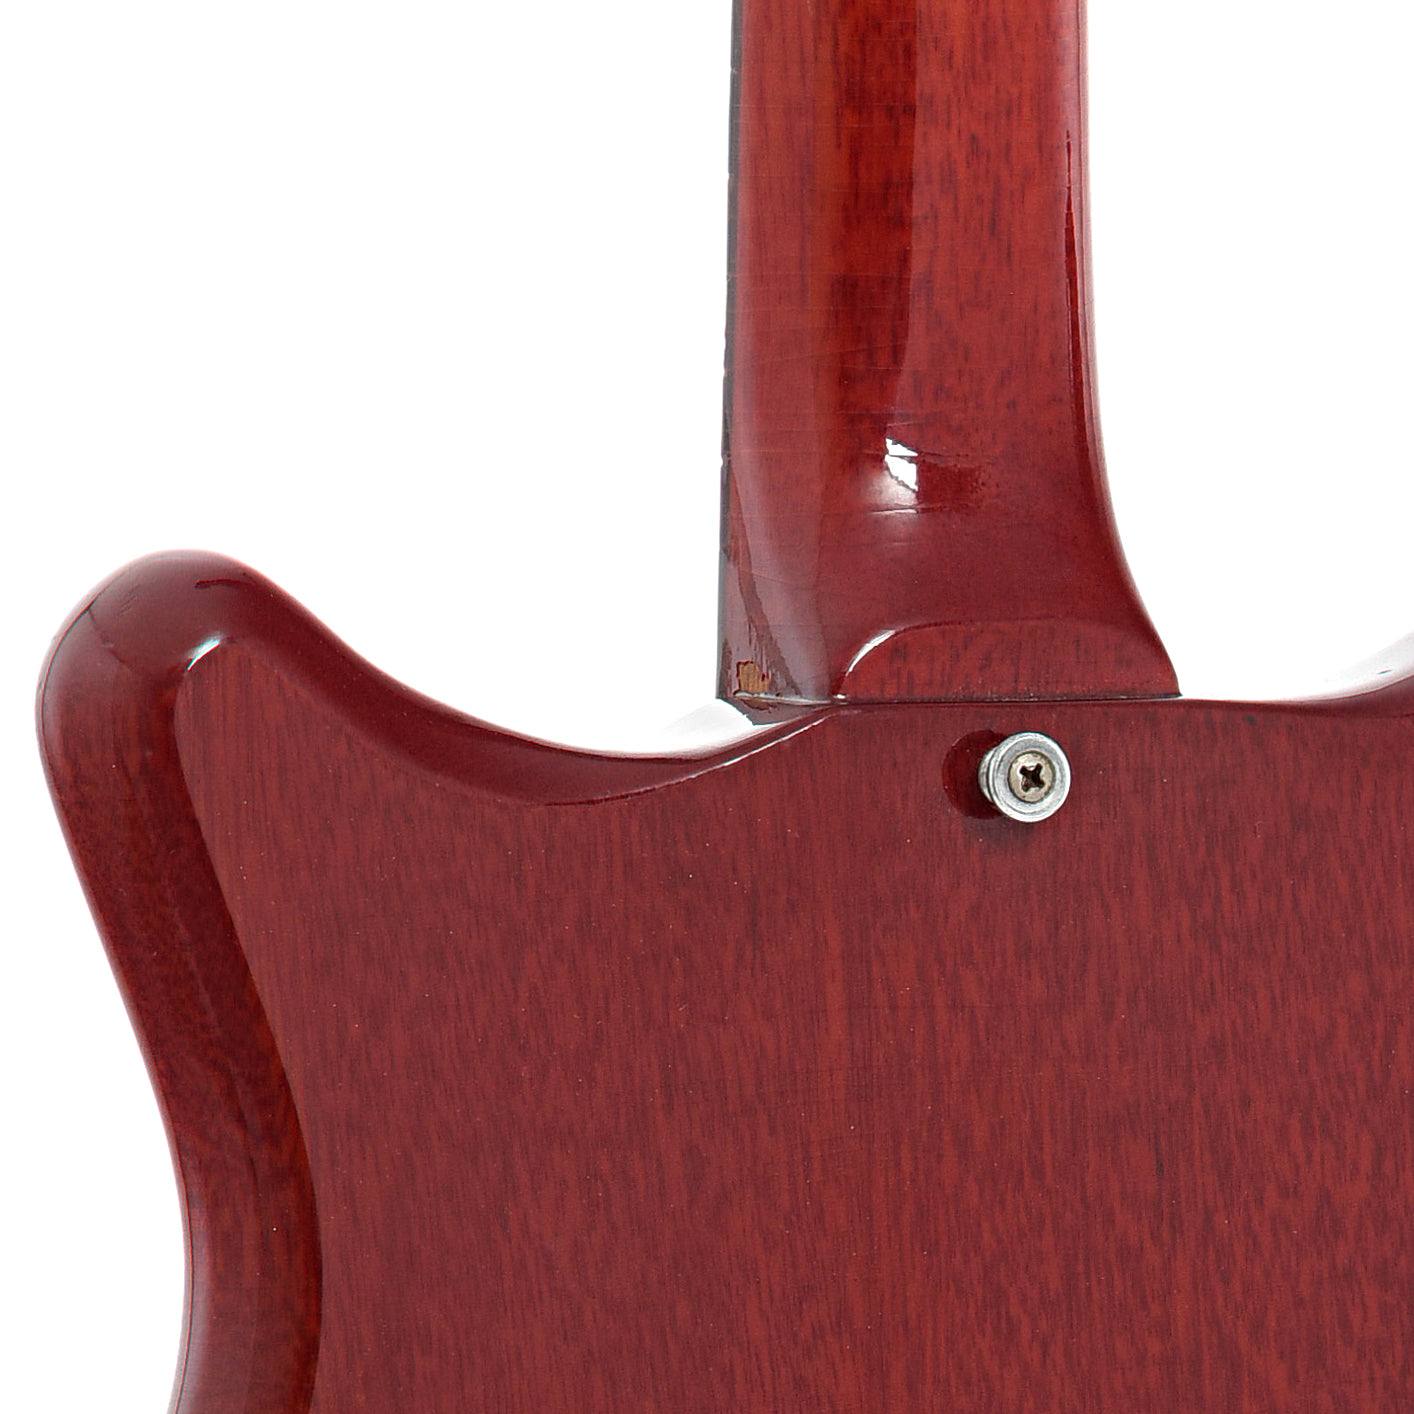 Neck joint of Epiphone Wilshire Electric Guitar (1964)